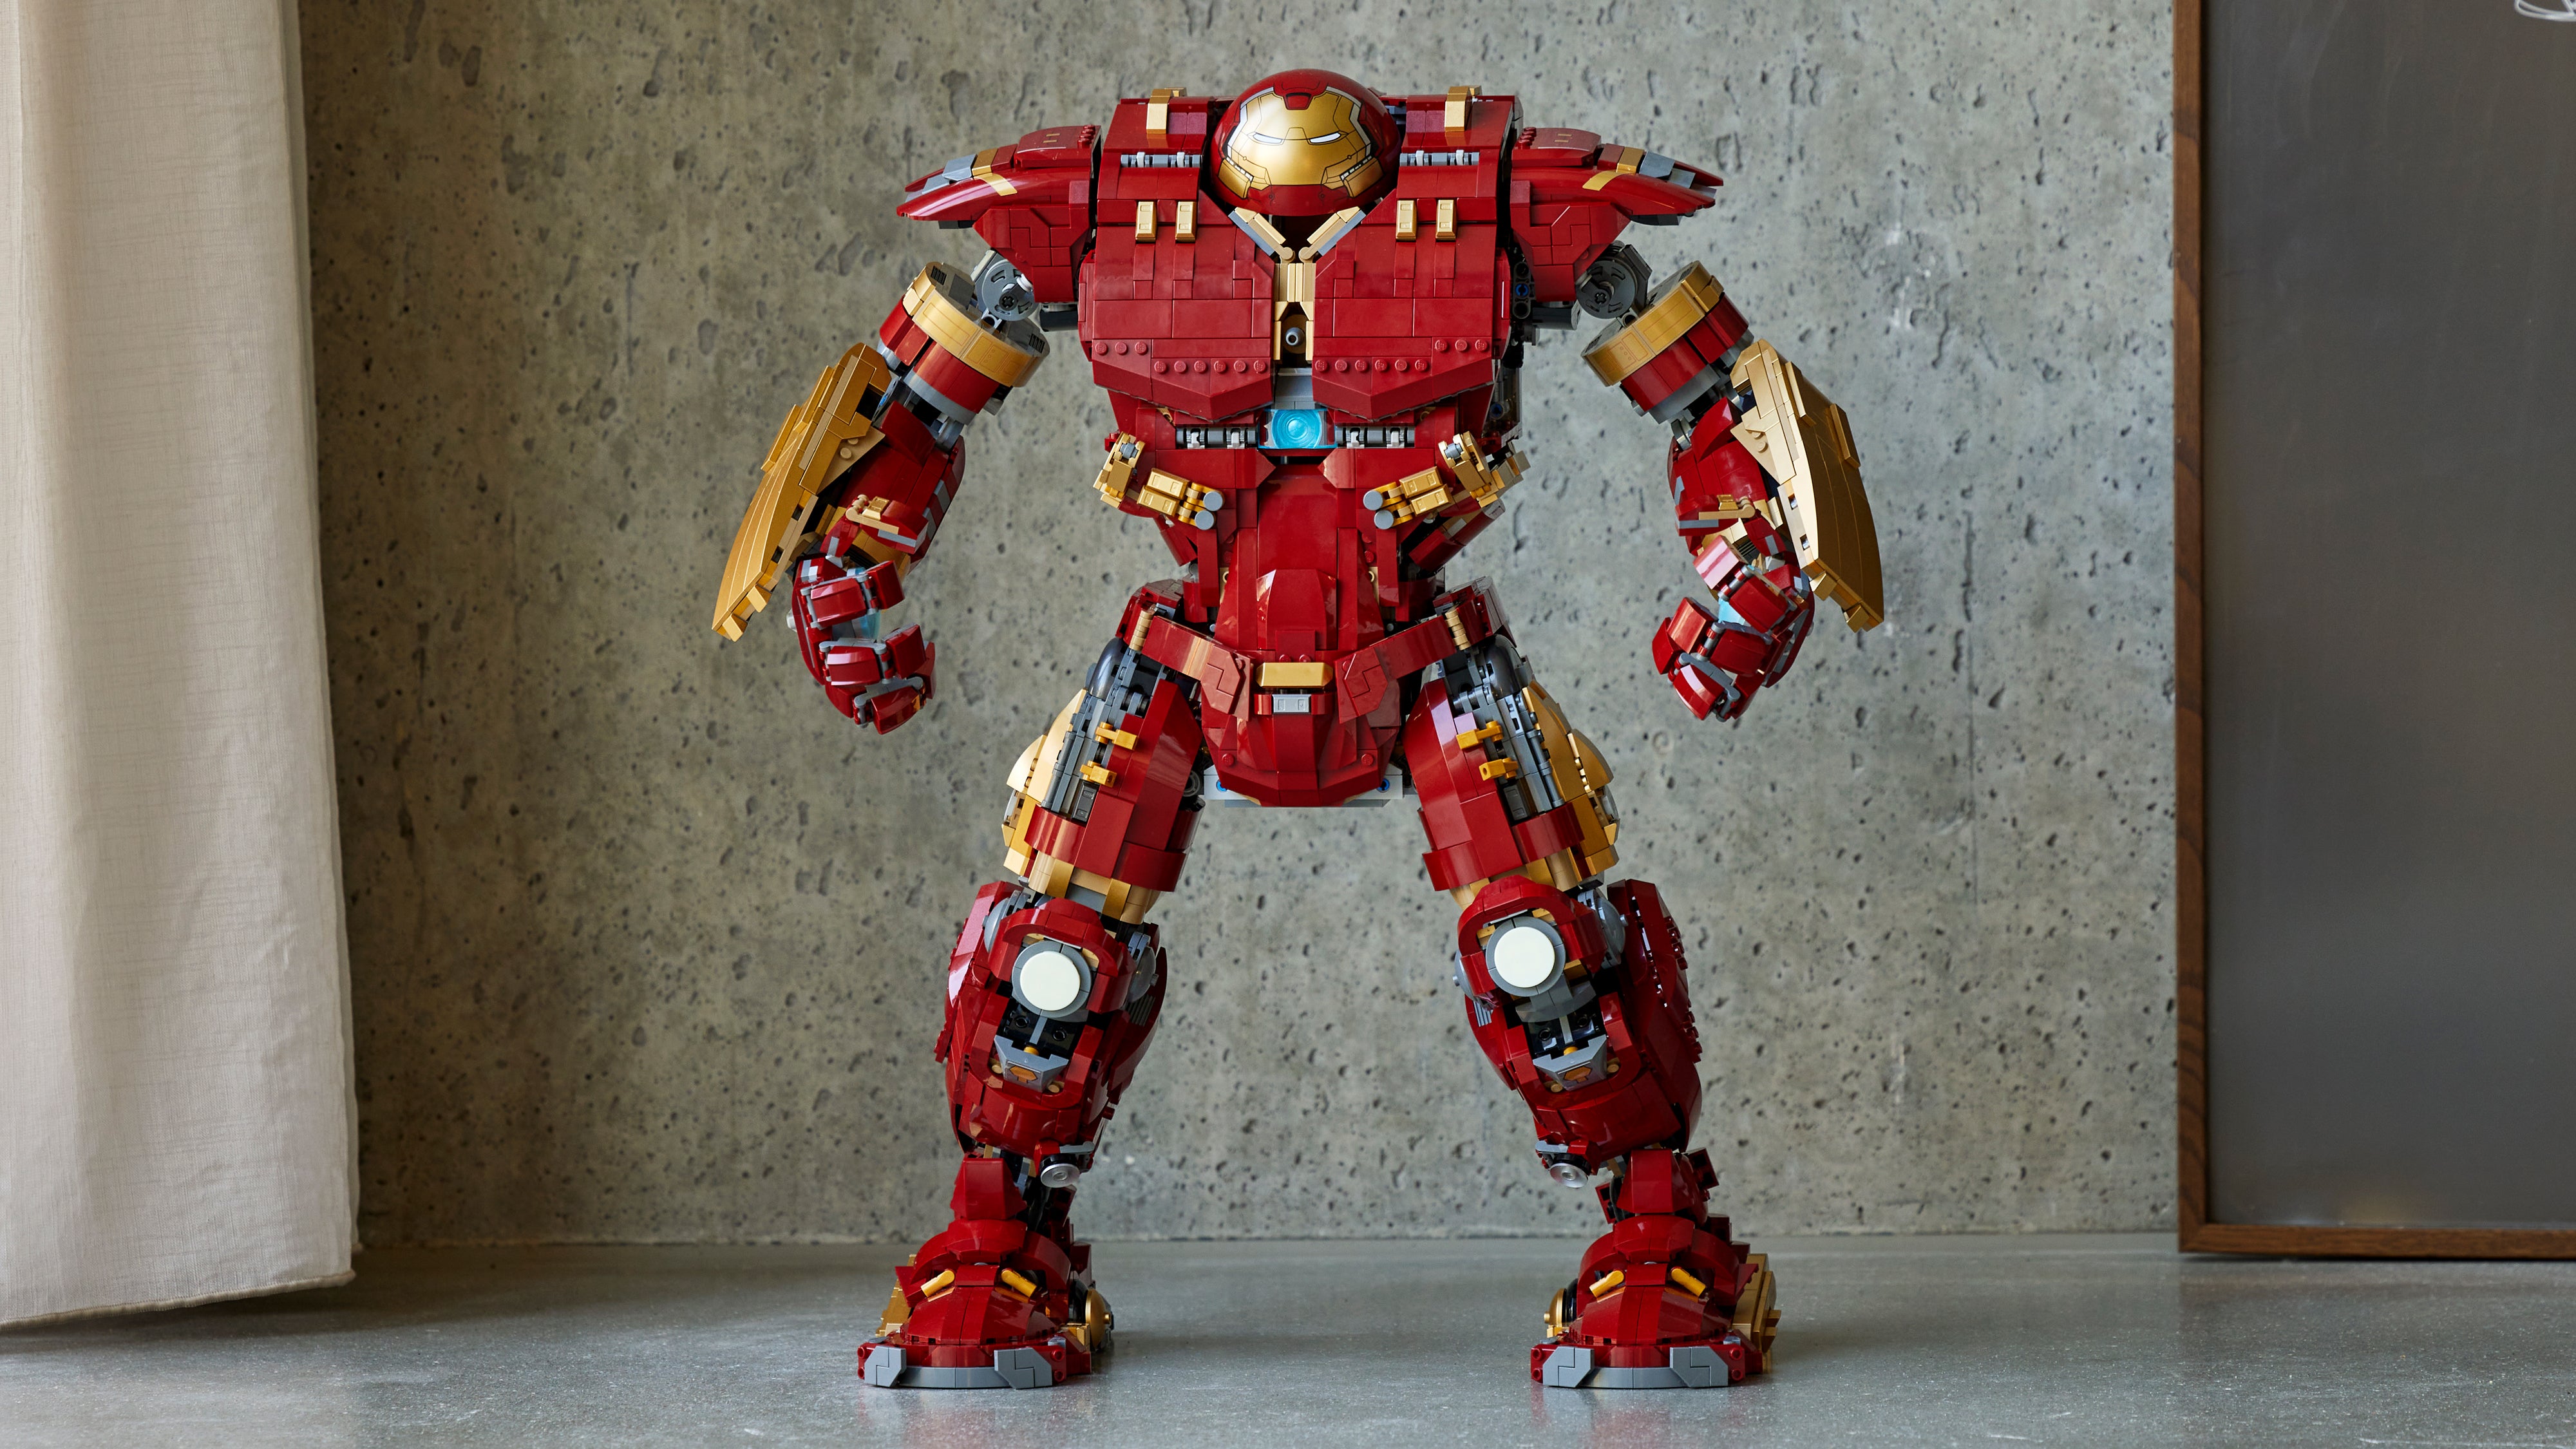 LEGO’s 4,049-Piece Iron Man Hulkbuster Is the Largest and Most Expensive Marvel Set Ever Released